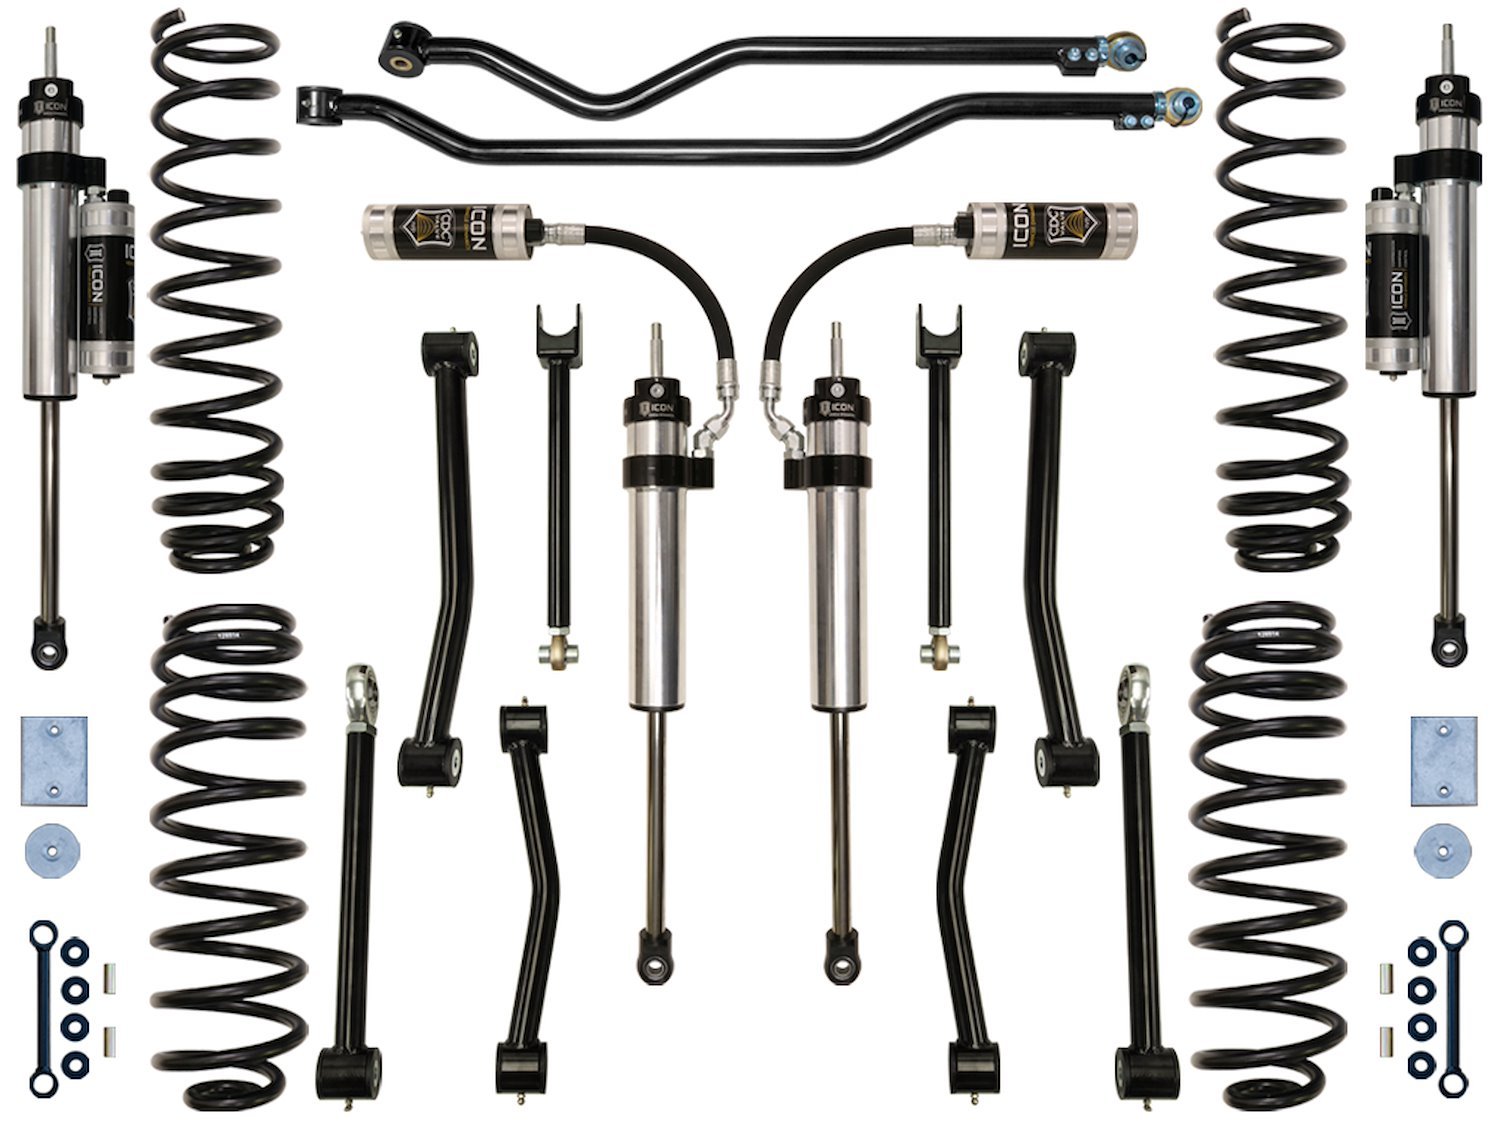 K22005 Front and Rear Suspension Lift Kit, Lift Amount: 3 in. Front/3 in. Rear